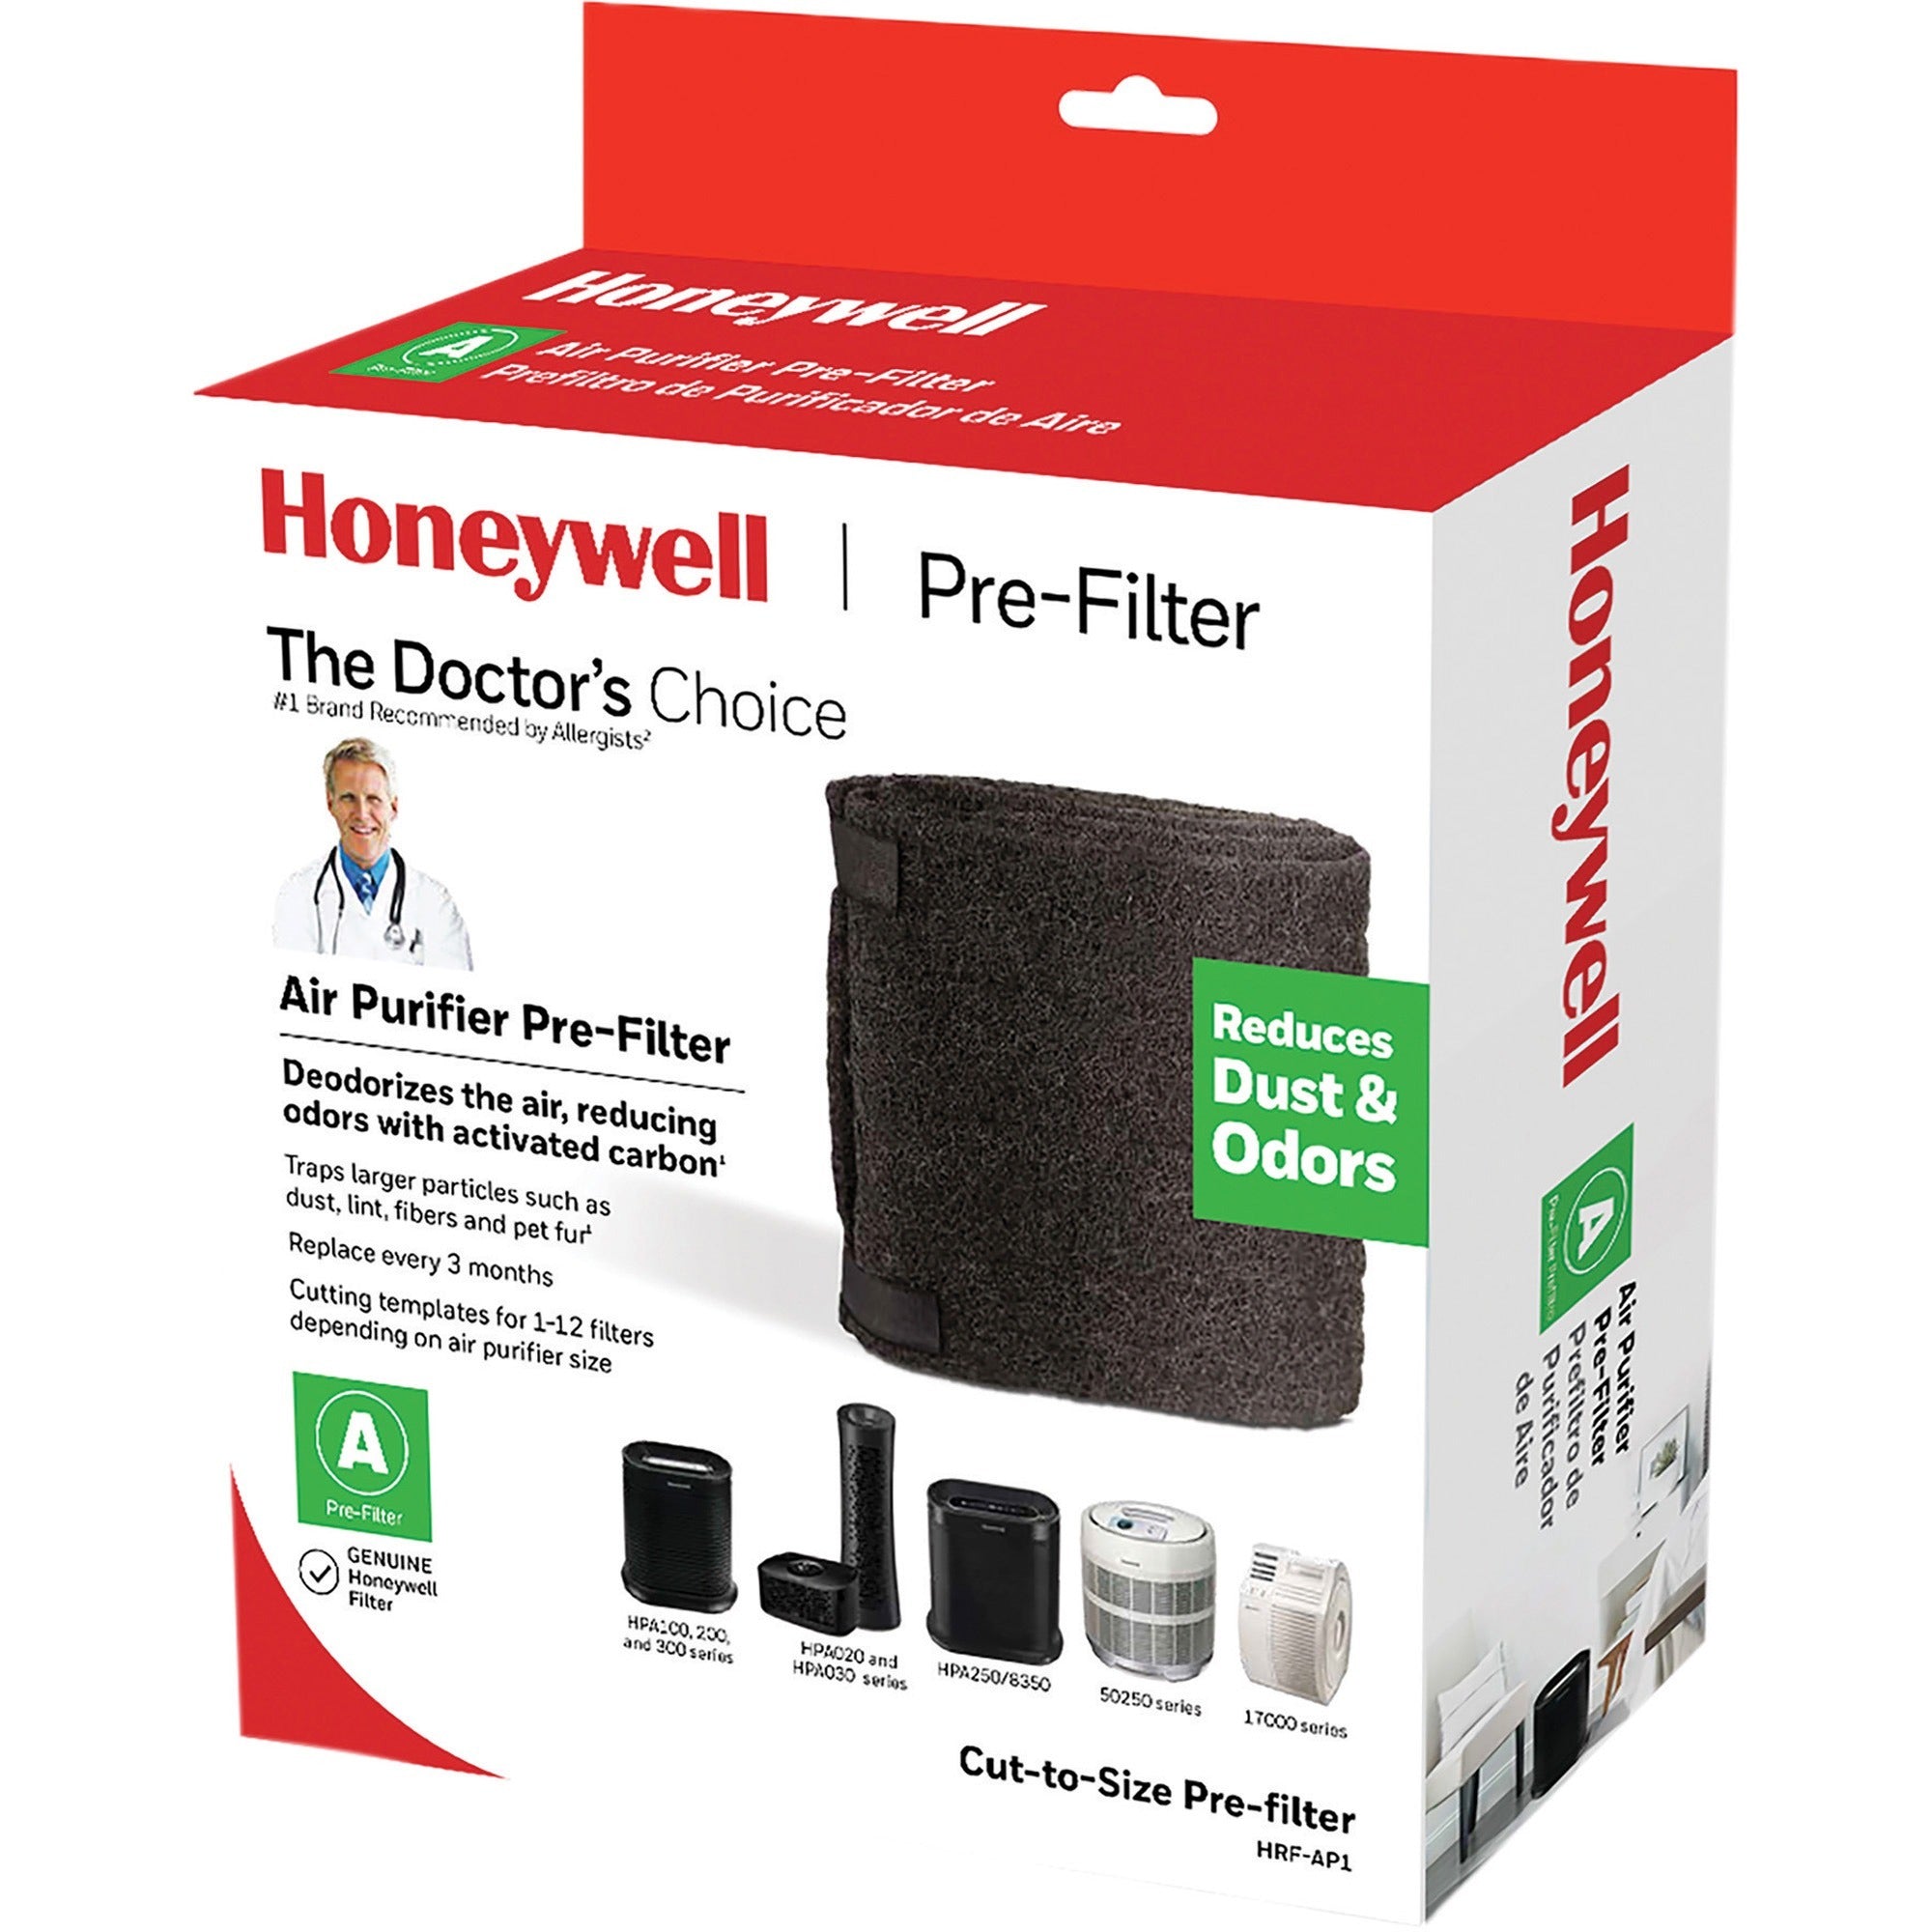 honeywell-pre-filter-for-air-purifier-activated-carbon-for-air-purifier-remove-odor-remove-dust-remove-fabric-fiber-remove-pet-hair-remove-airborne-particles-47-height-x-155-width-x-01-depth_hwlhrfap1v1ct - 1